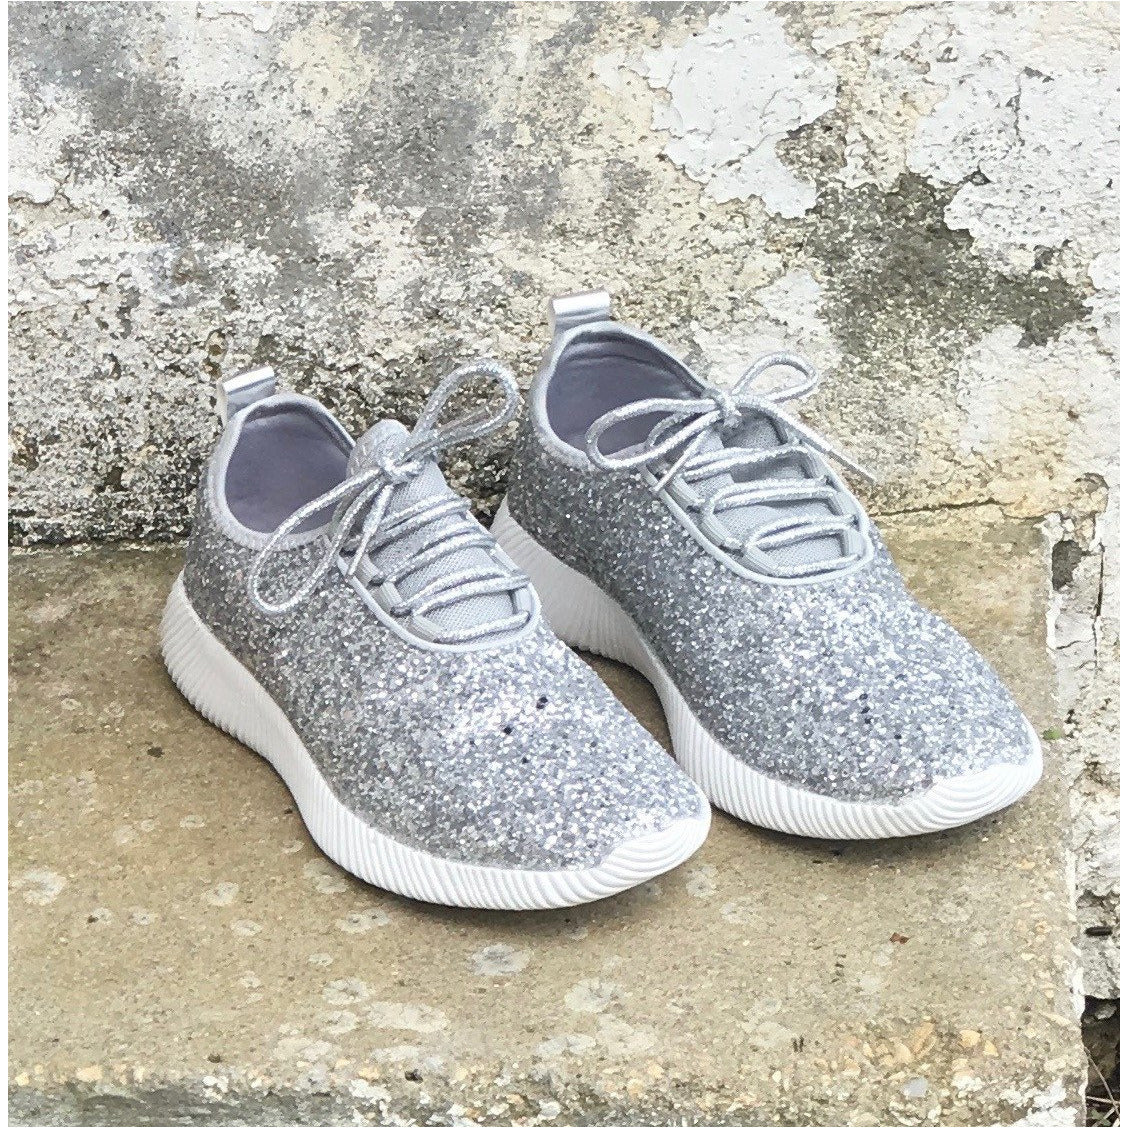 Women's Glitter Tennis Sneakers Floral Dressy Sparkly Sneakers Wedding  Bridal Shiny Sequin Shoe Fashion Purple Casual Shoes Flat